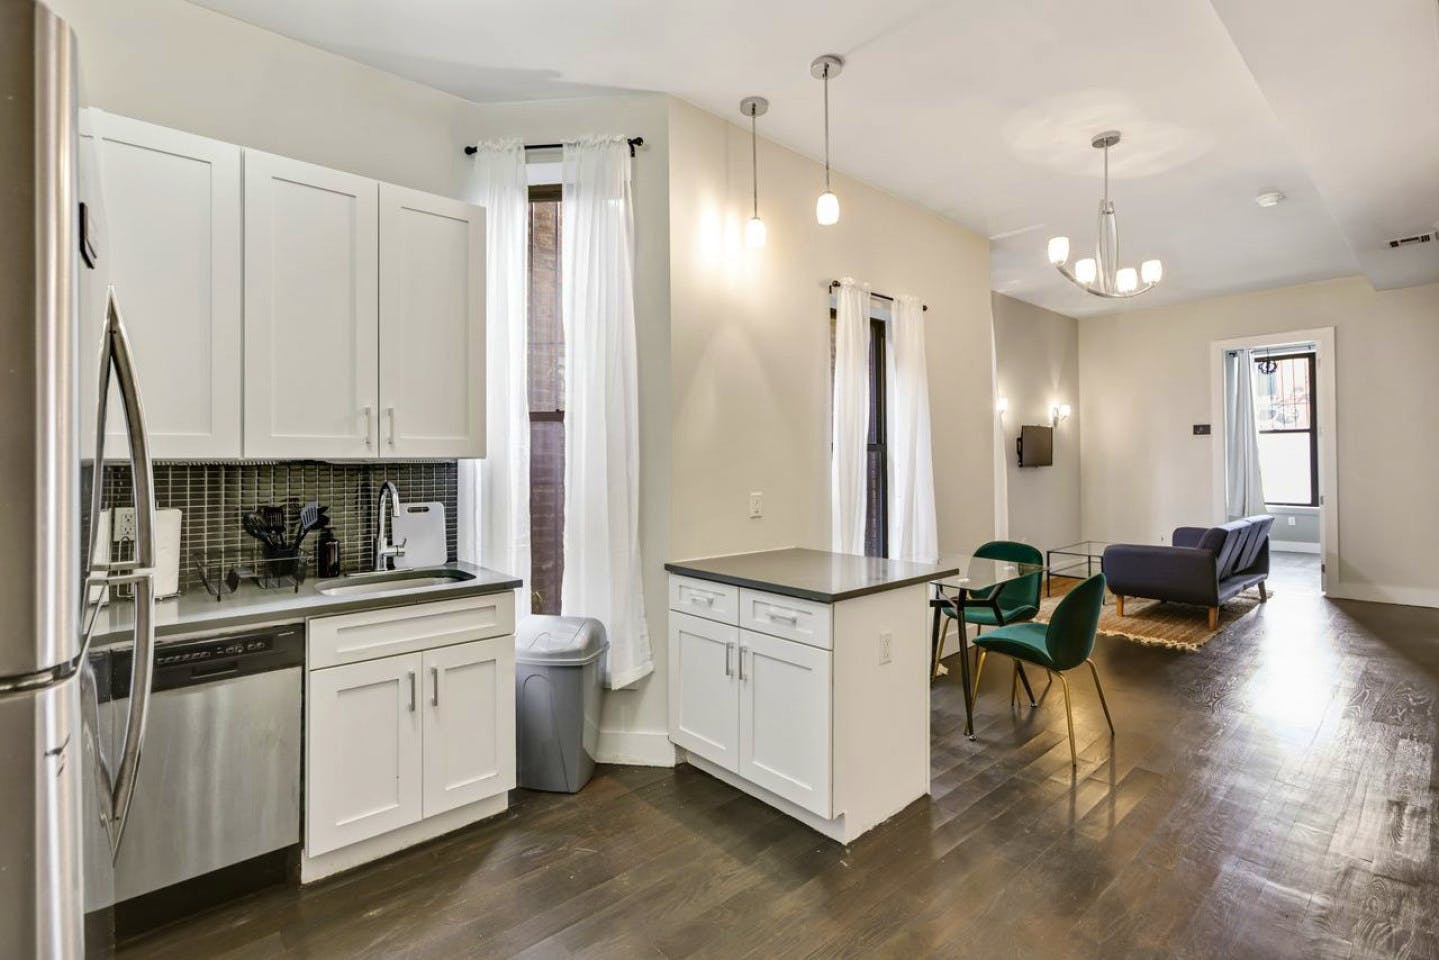 Modern Chic Apt. 2 miles away from Barclays Center